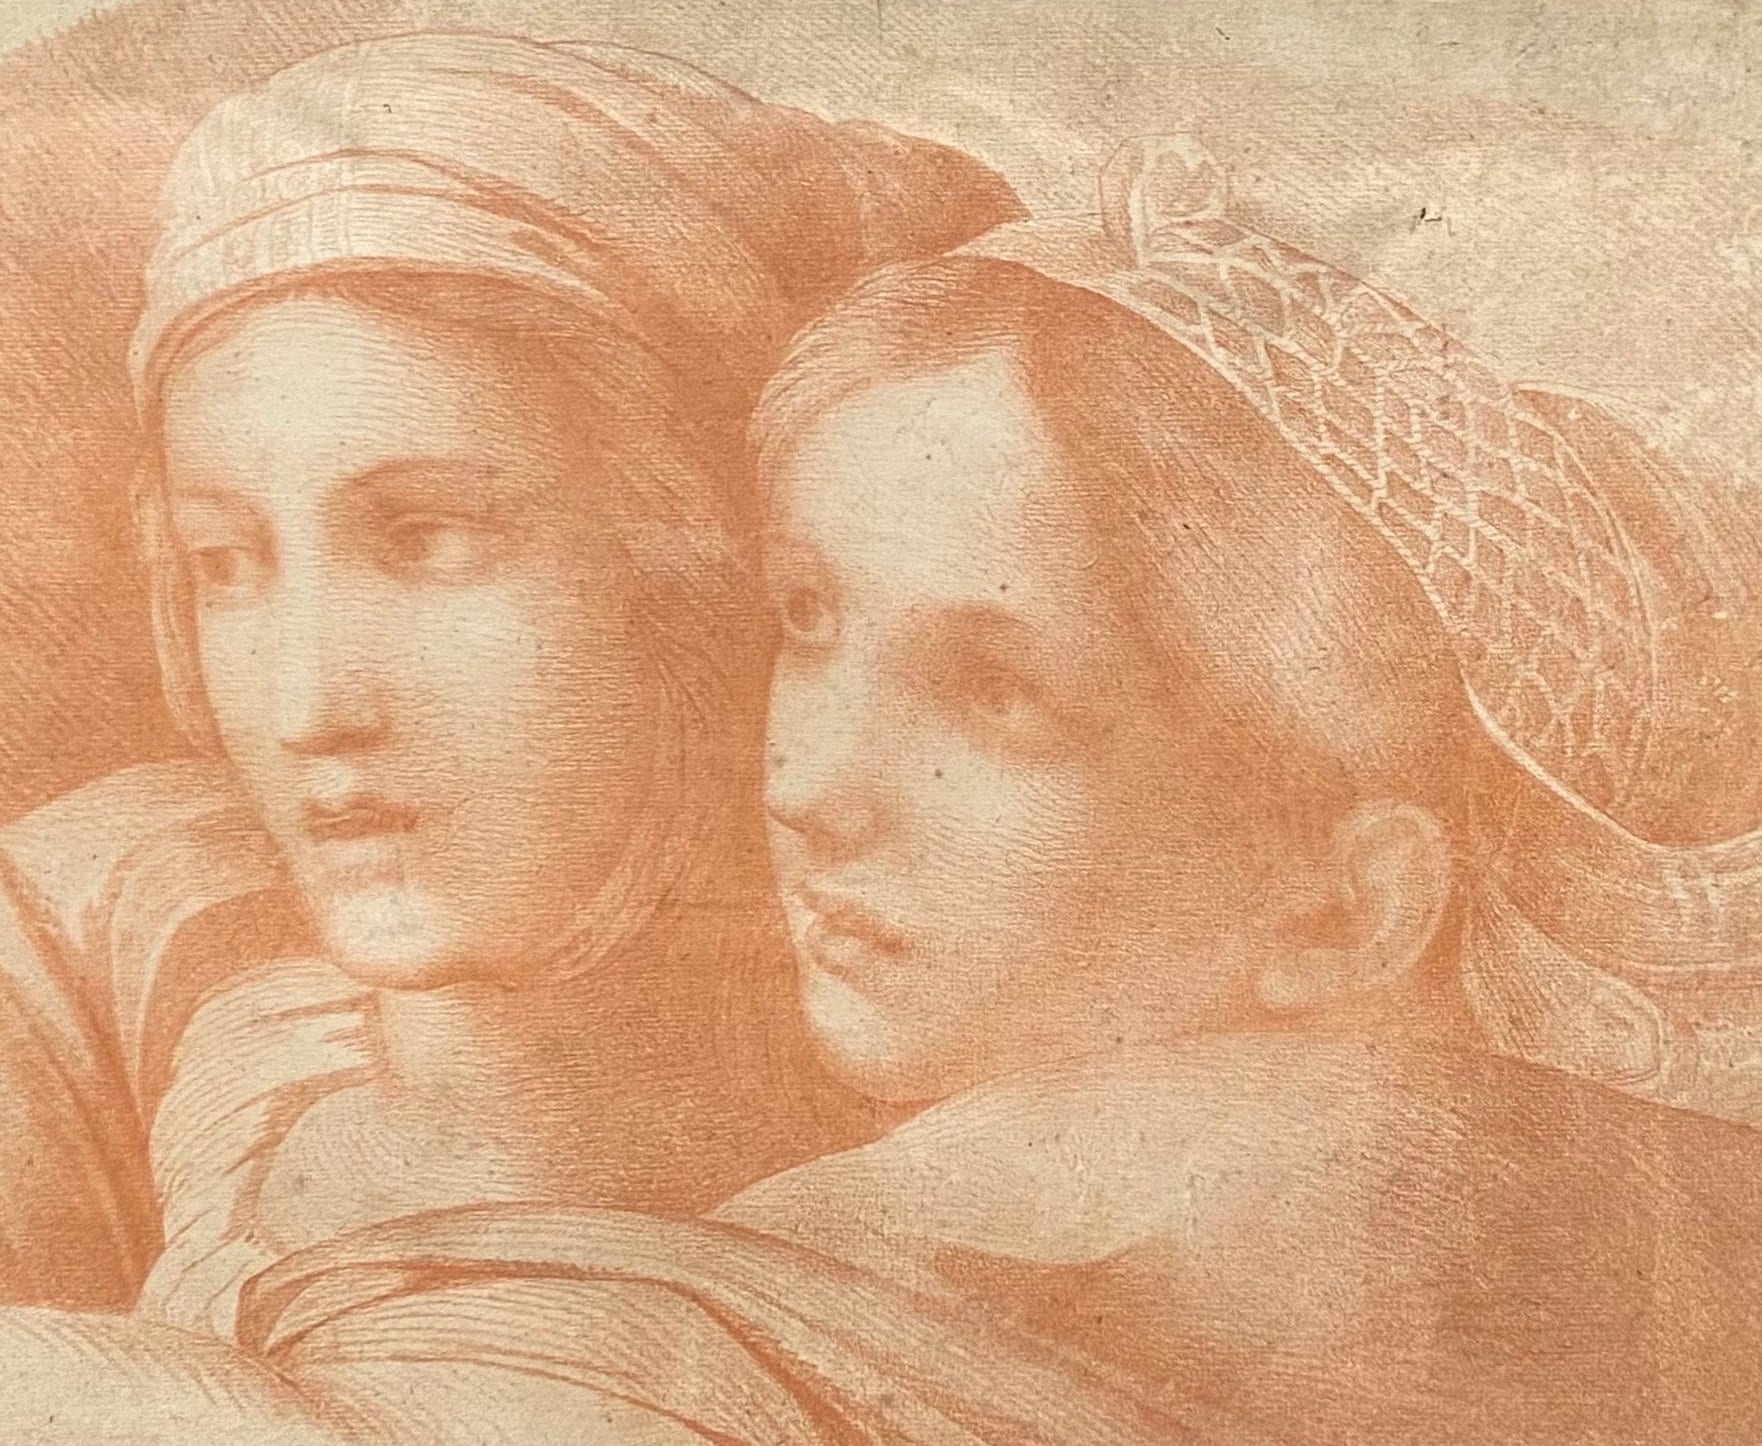 A Original Antigue Hand Drawn Sanguine Drawing. Two Young Women . French. Late 18th Century. Size: 38.5 x 52 cms.